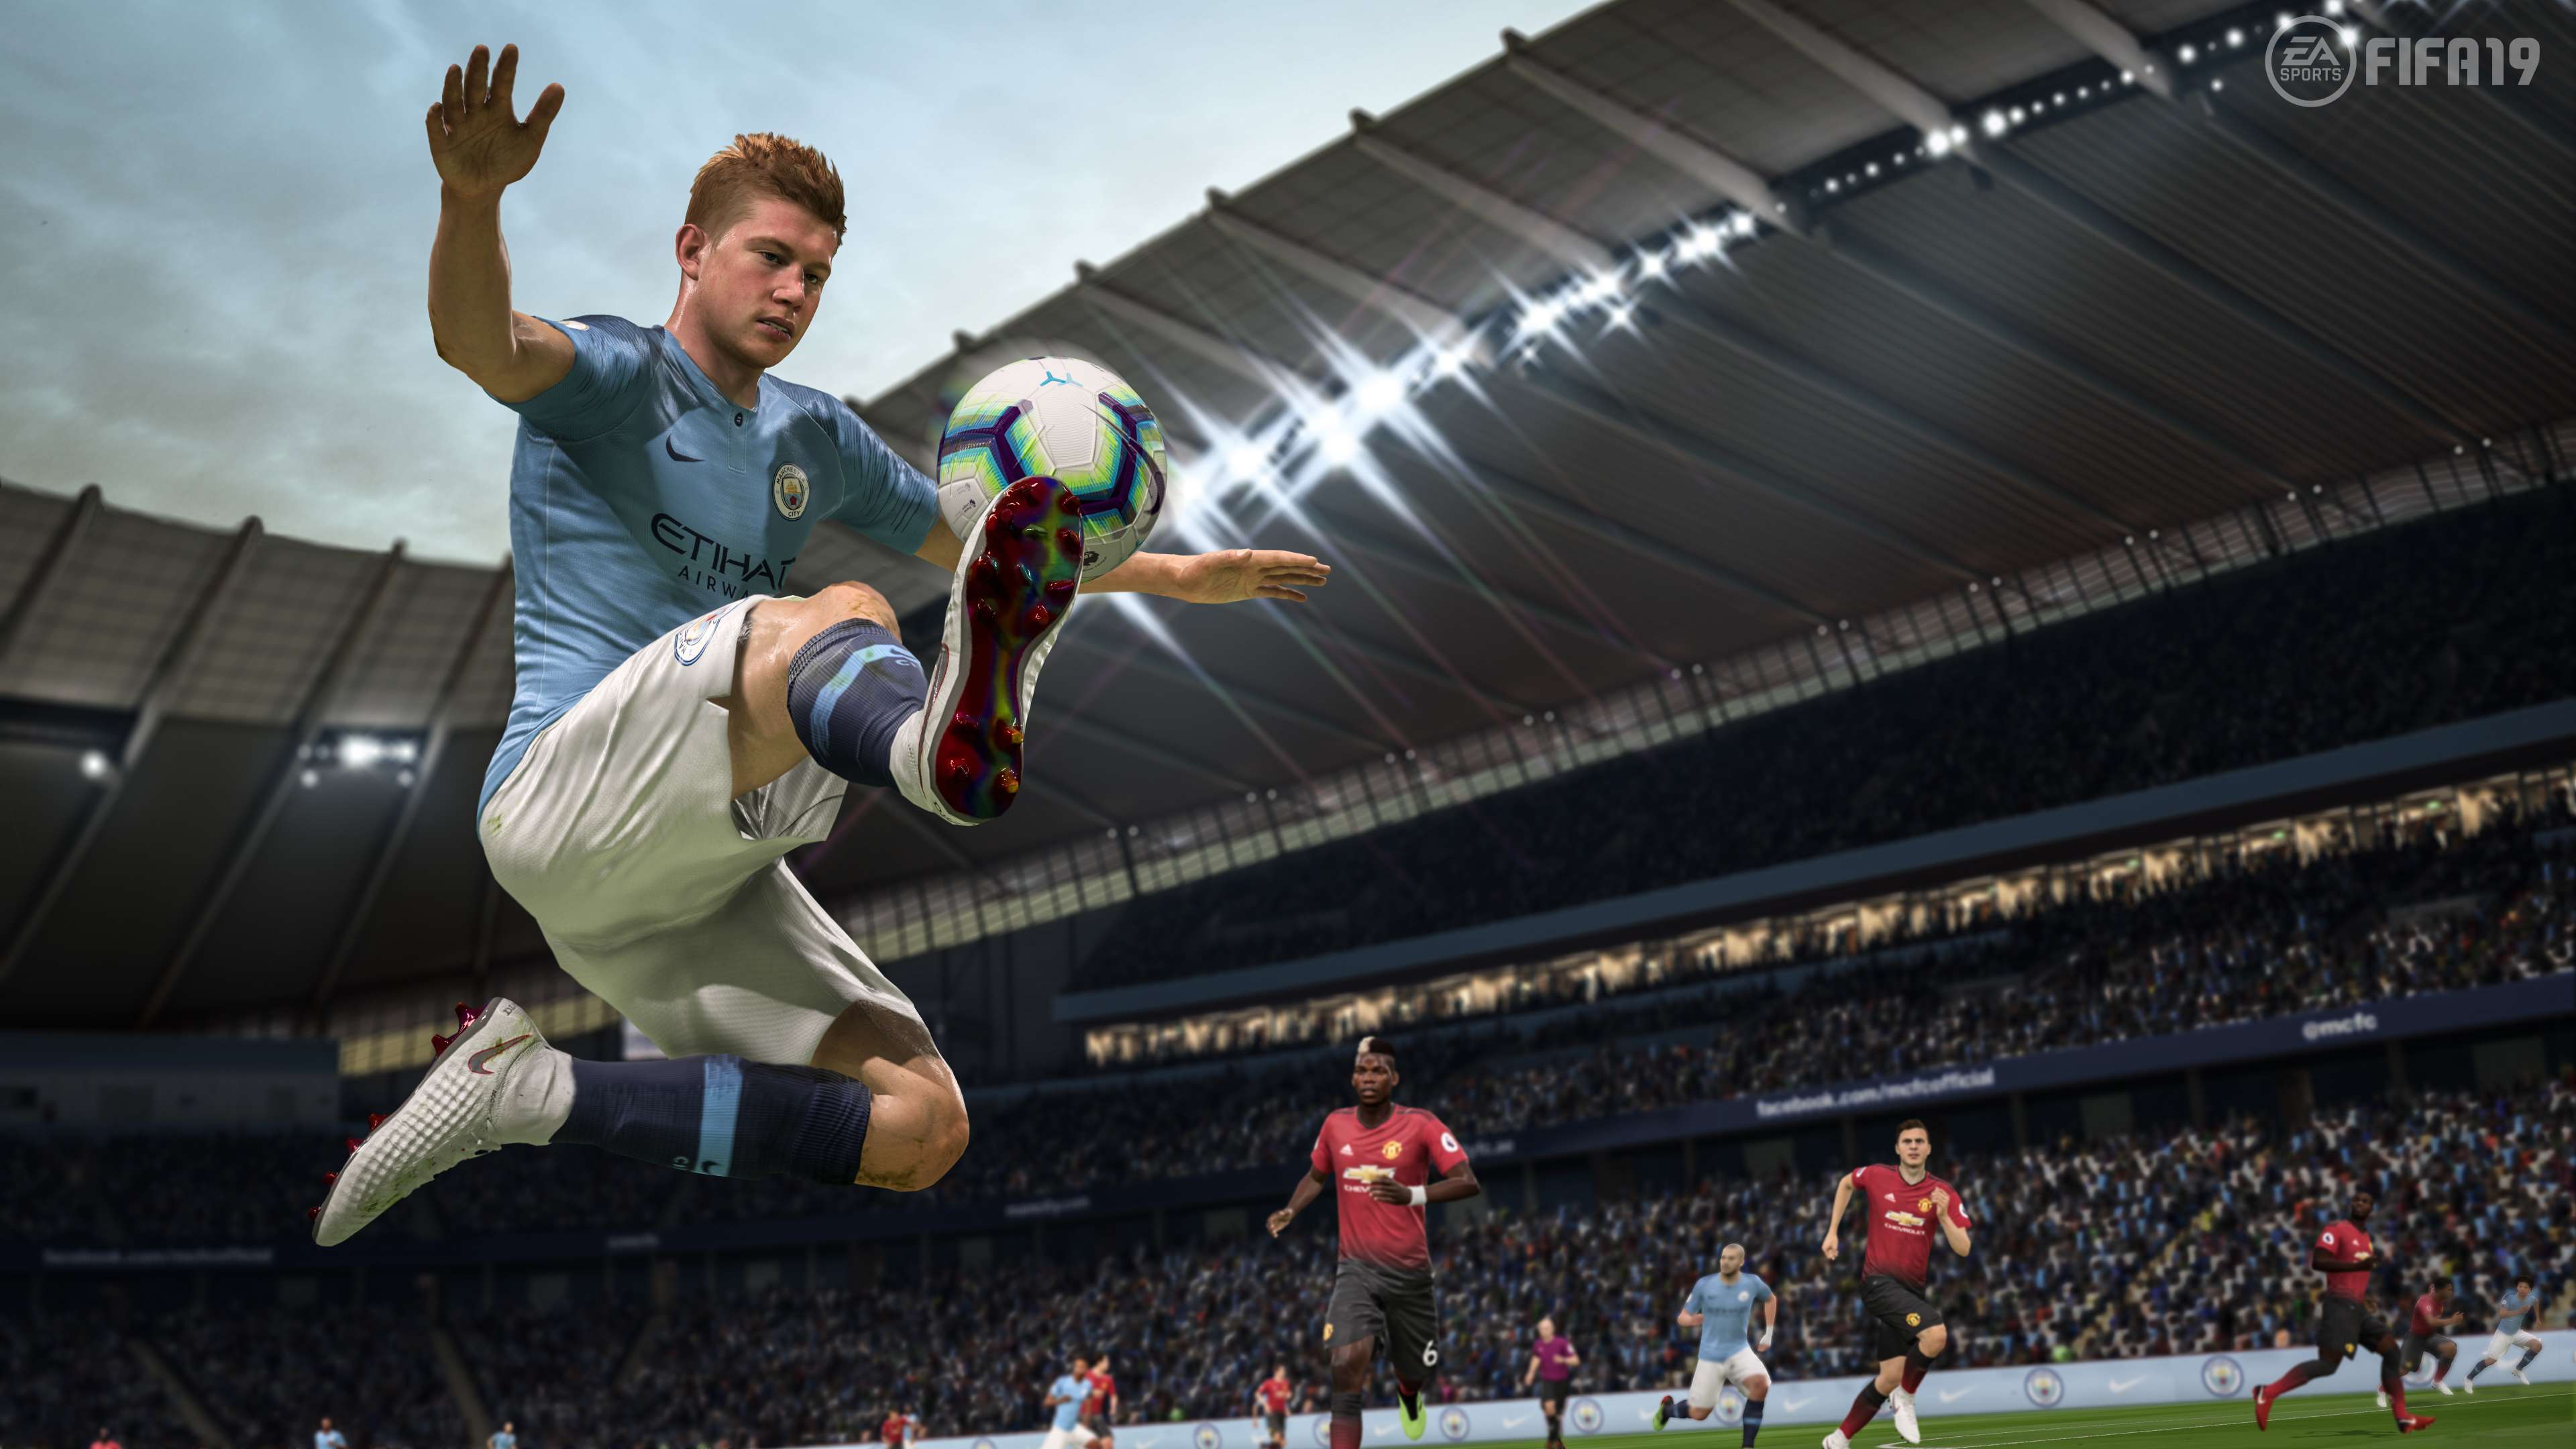 FIFA 19 Active Touch